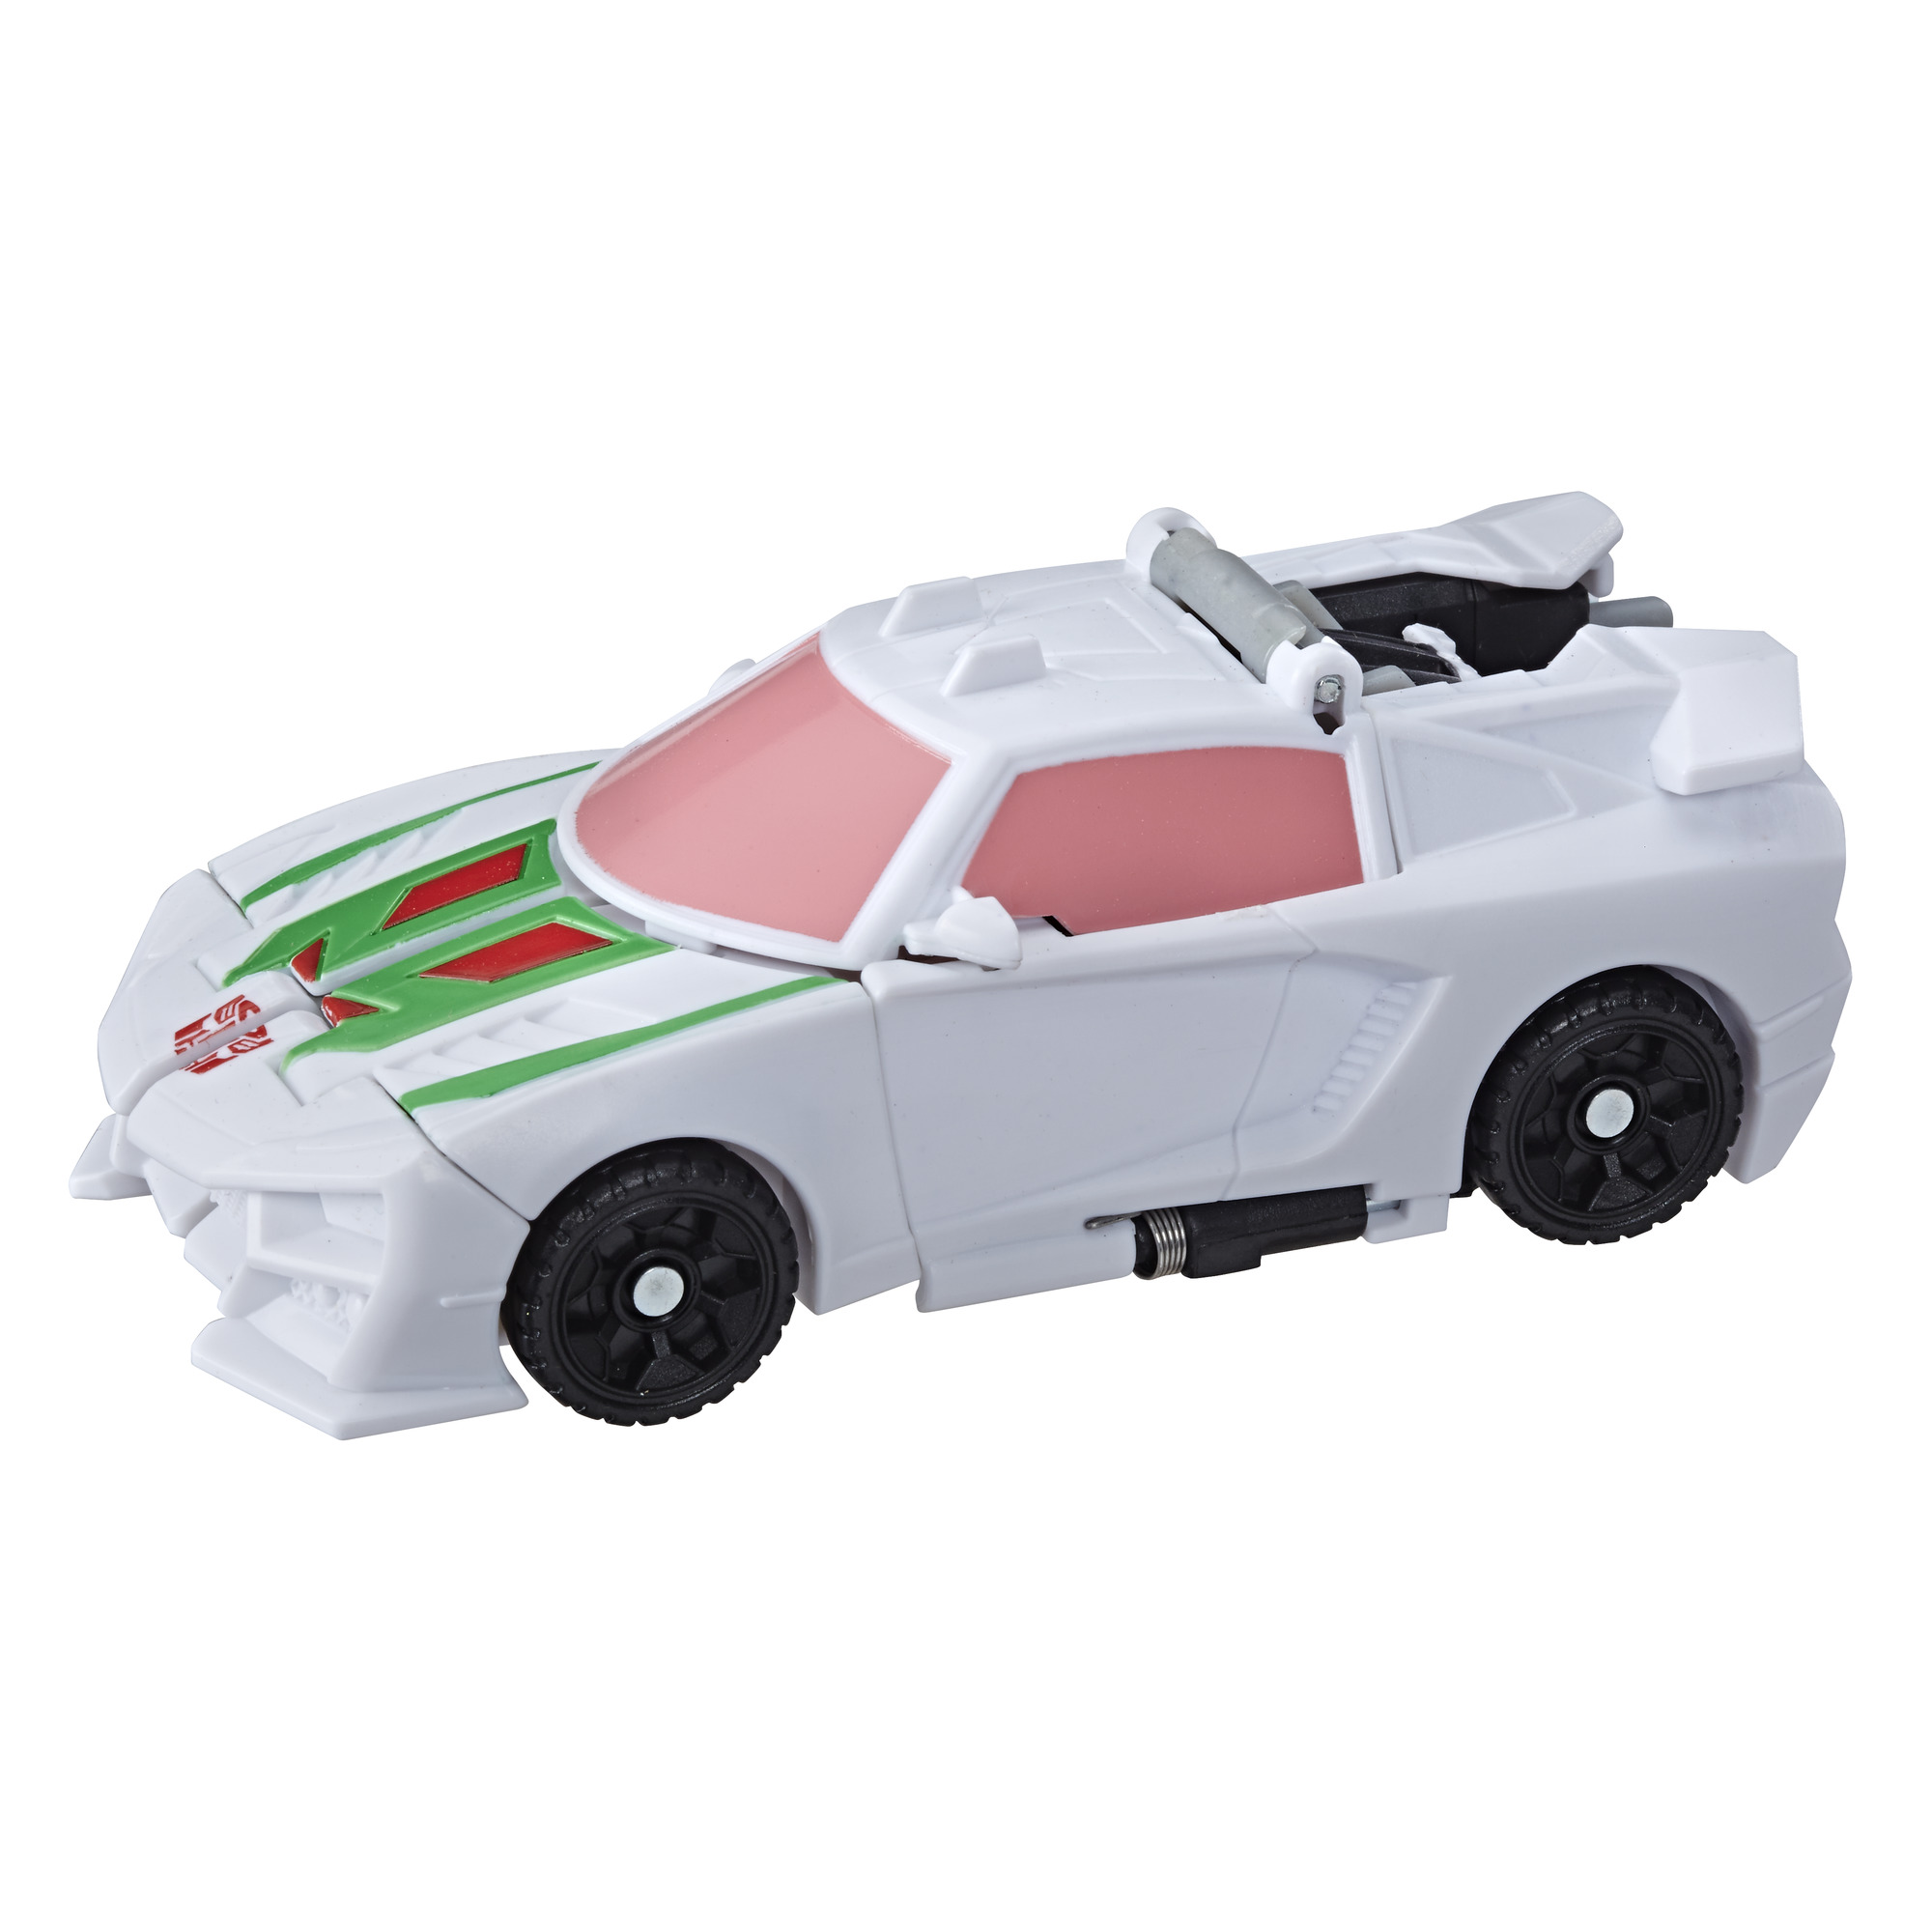 Transformers Cyberverse Action Attackers: 1-Step Changer Wheeljack Action Figure - image 2 of 5